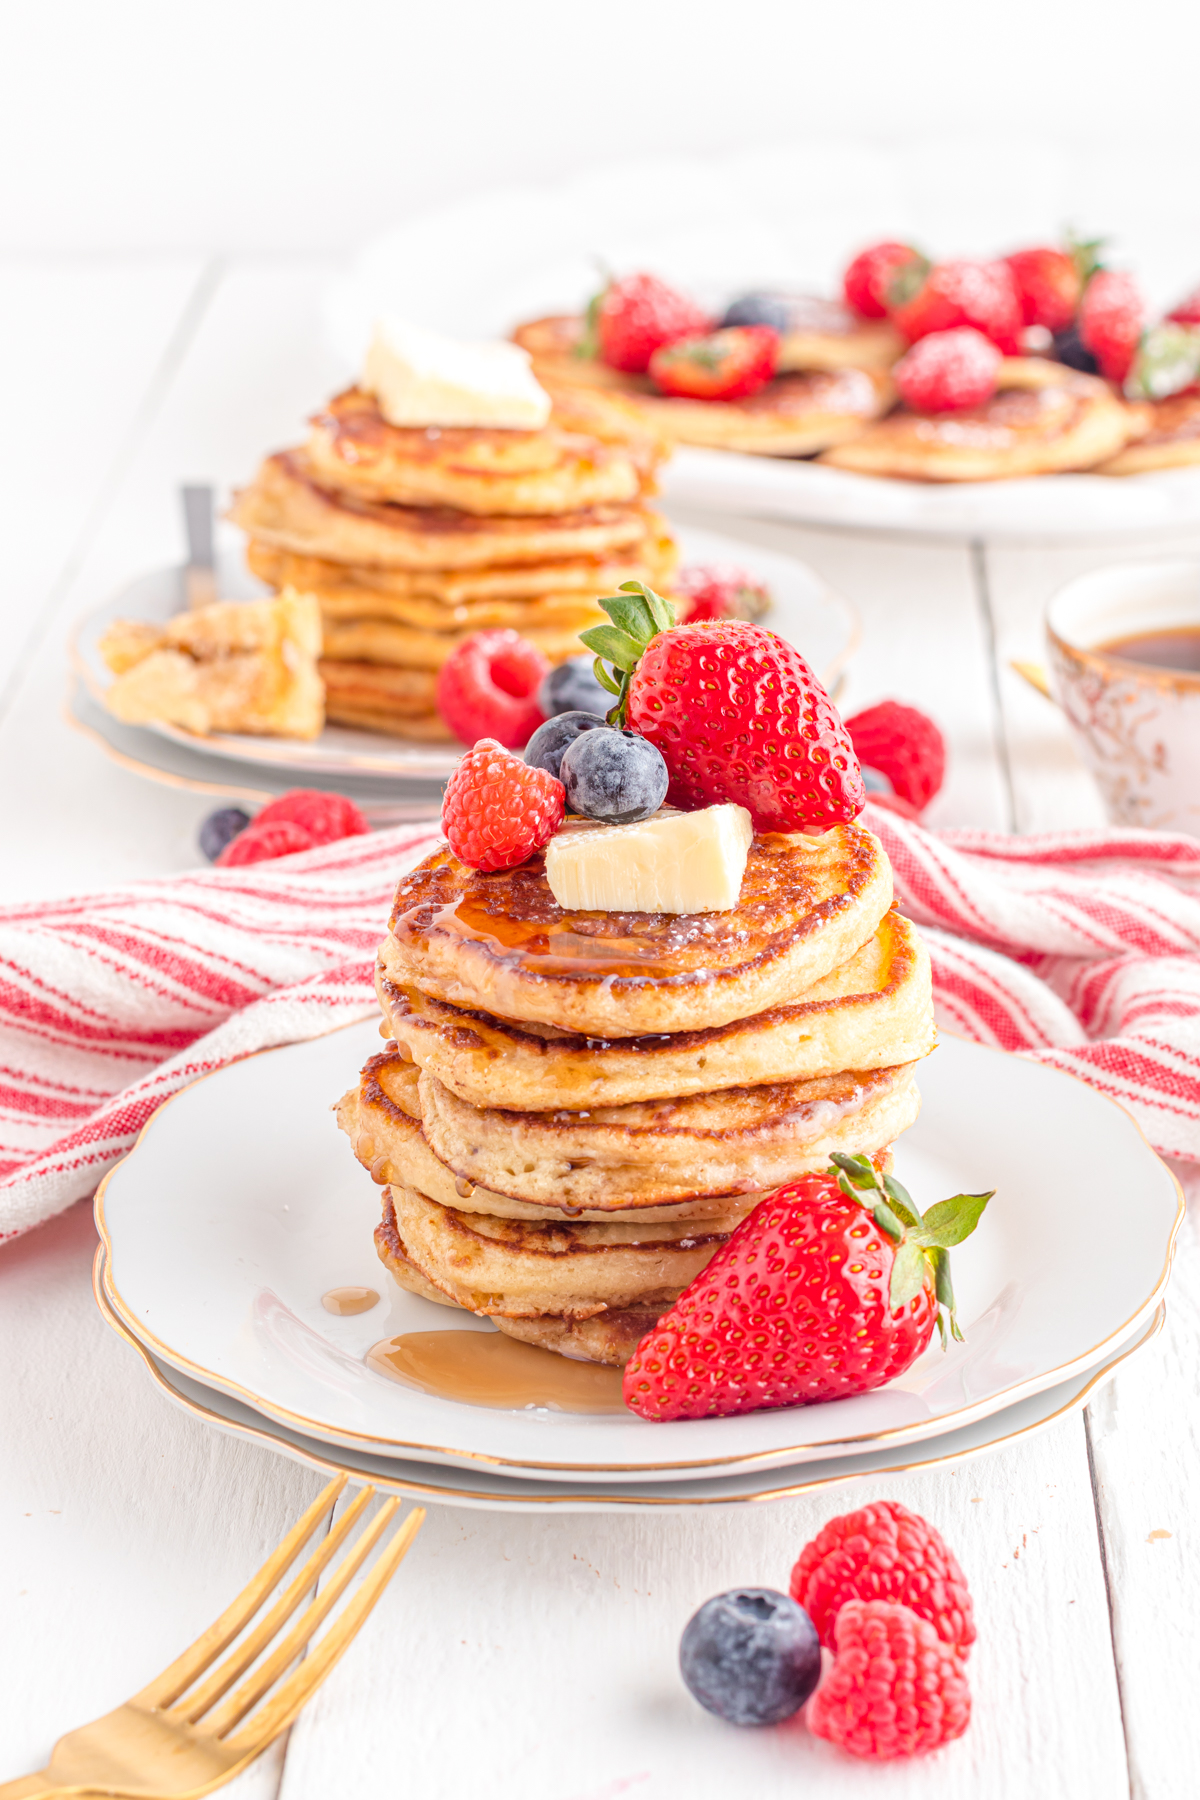 Pancake stack on a plate with berries.